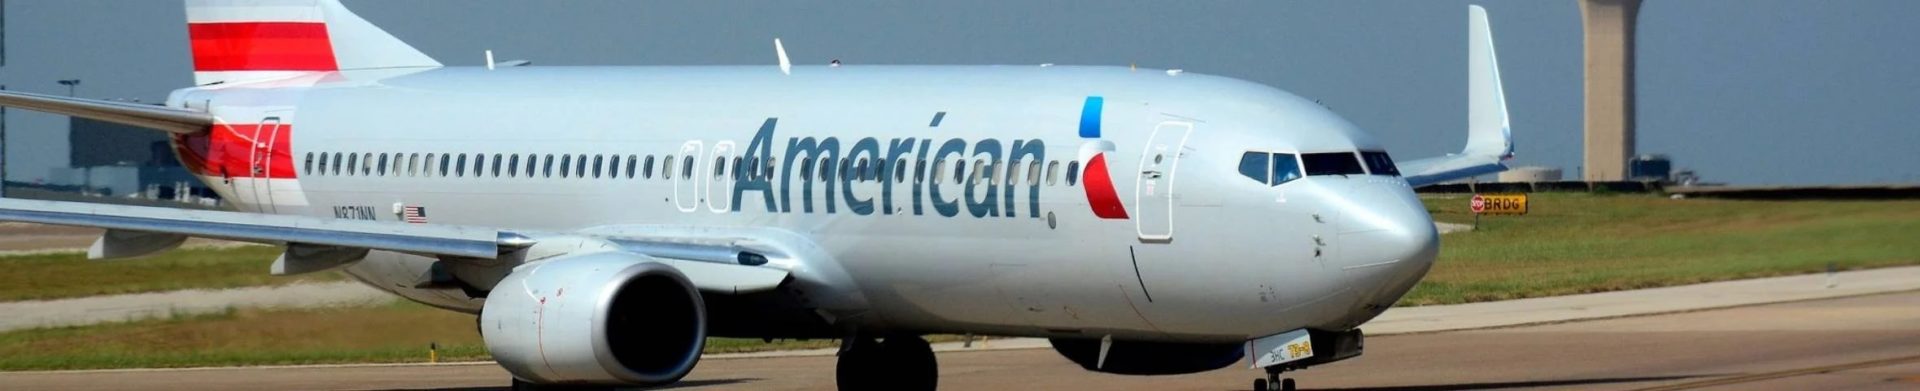 American Airlines plane on the runway